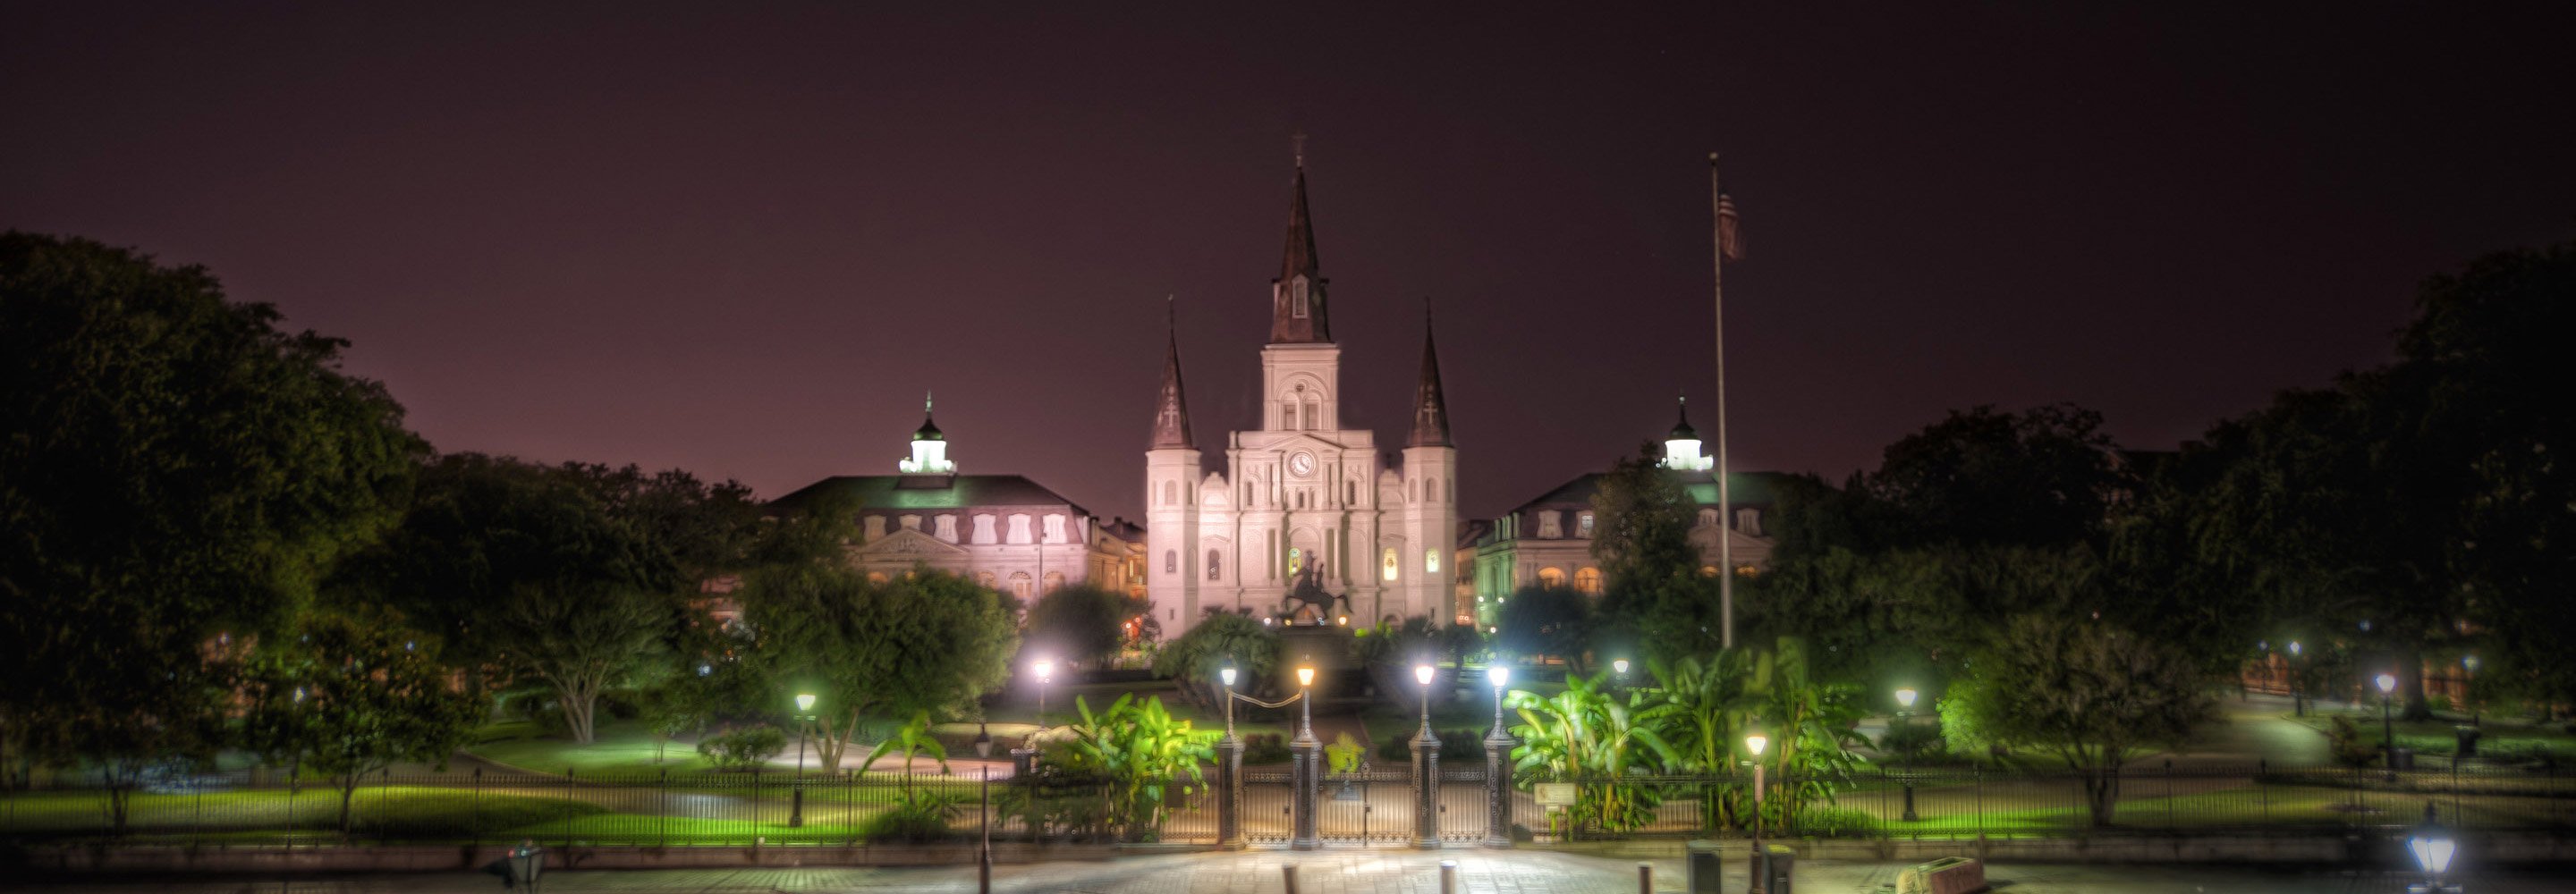 Ghost City Tours in New Orleans